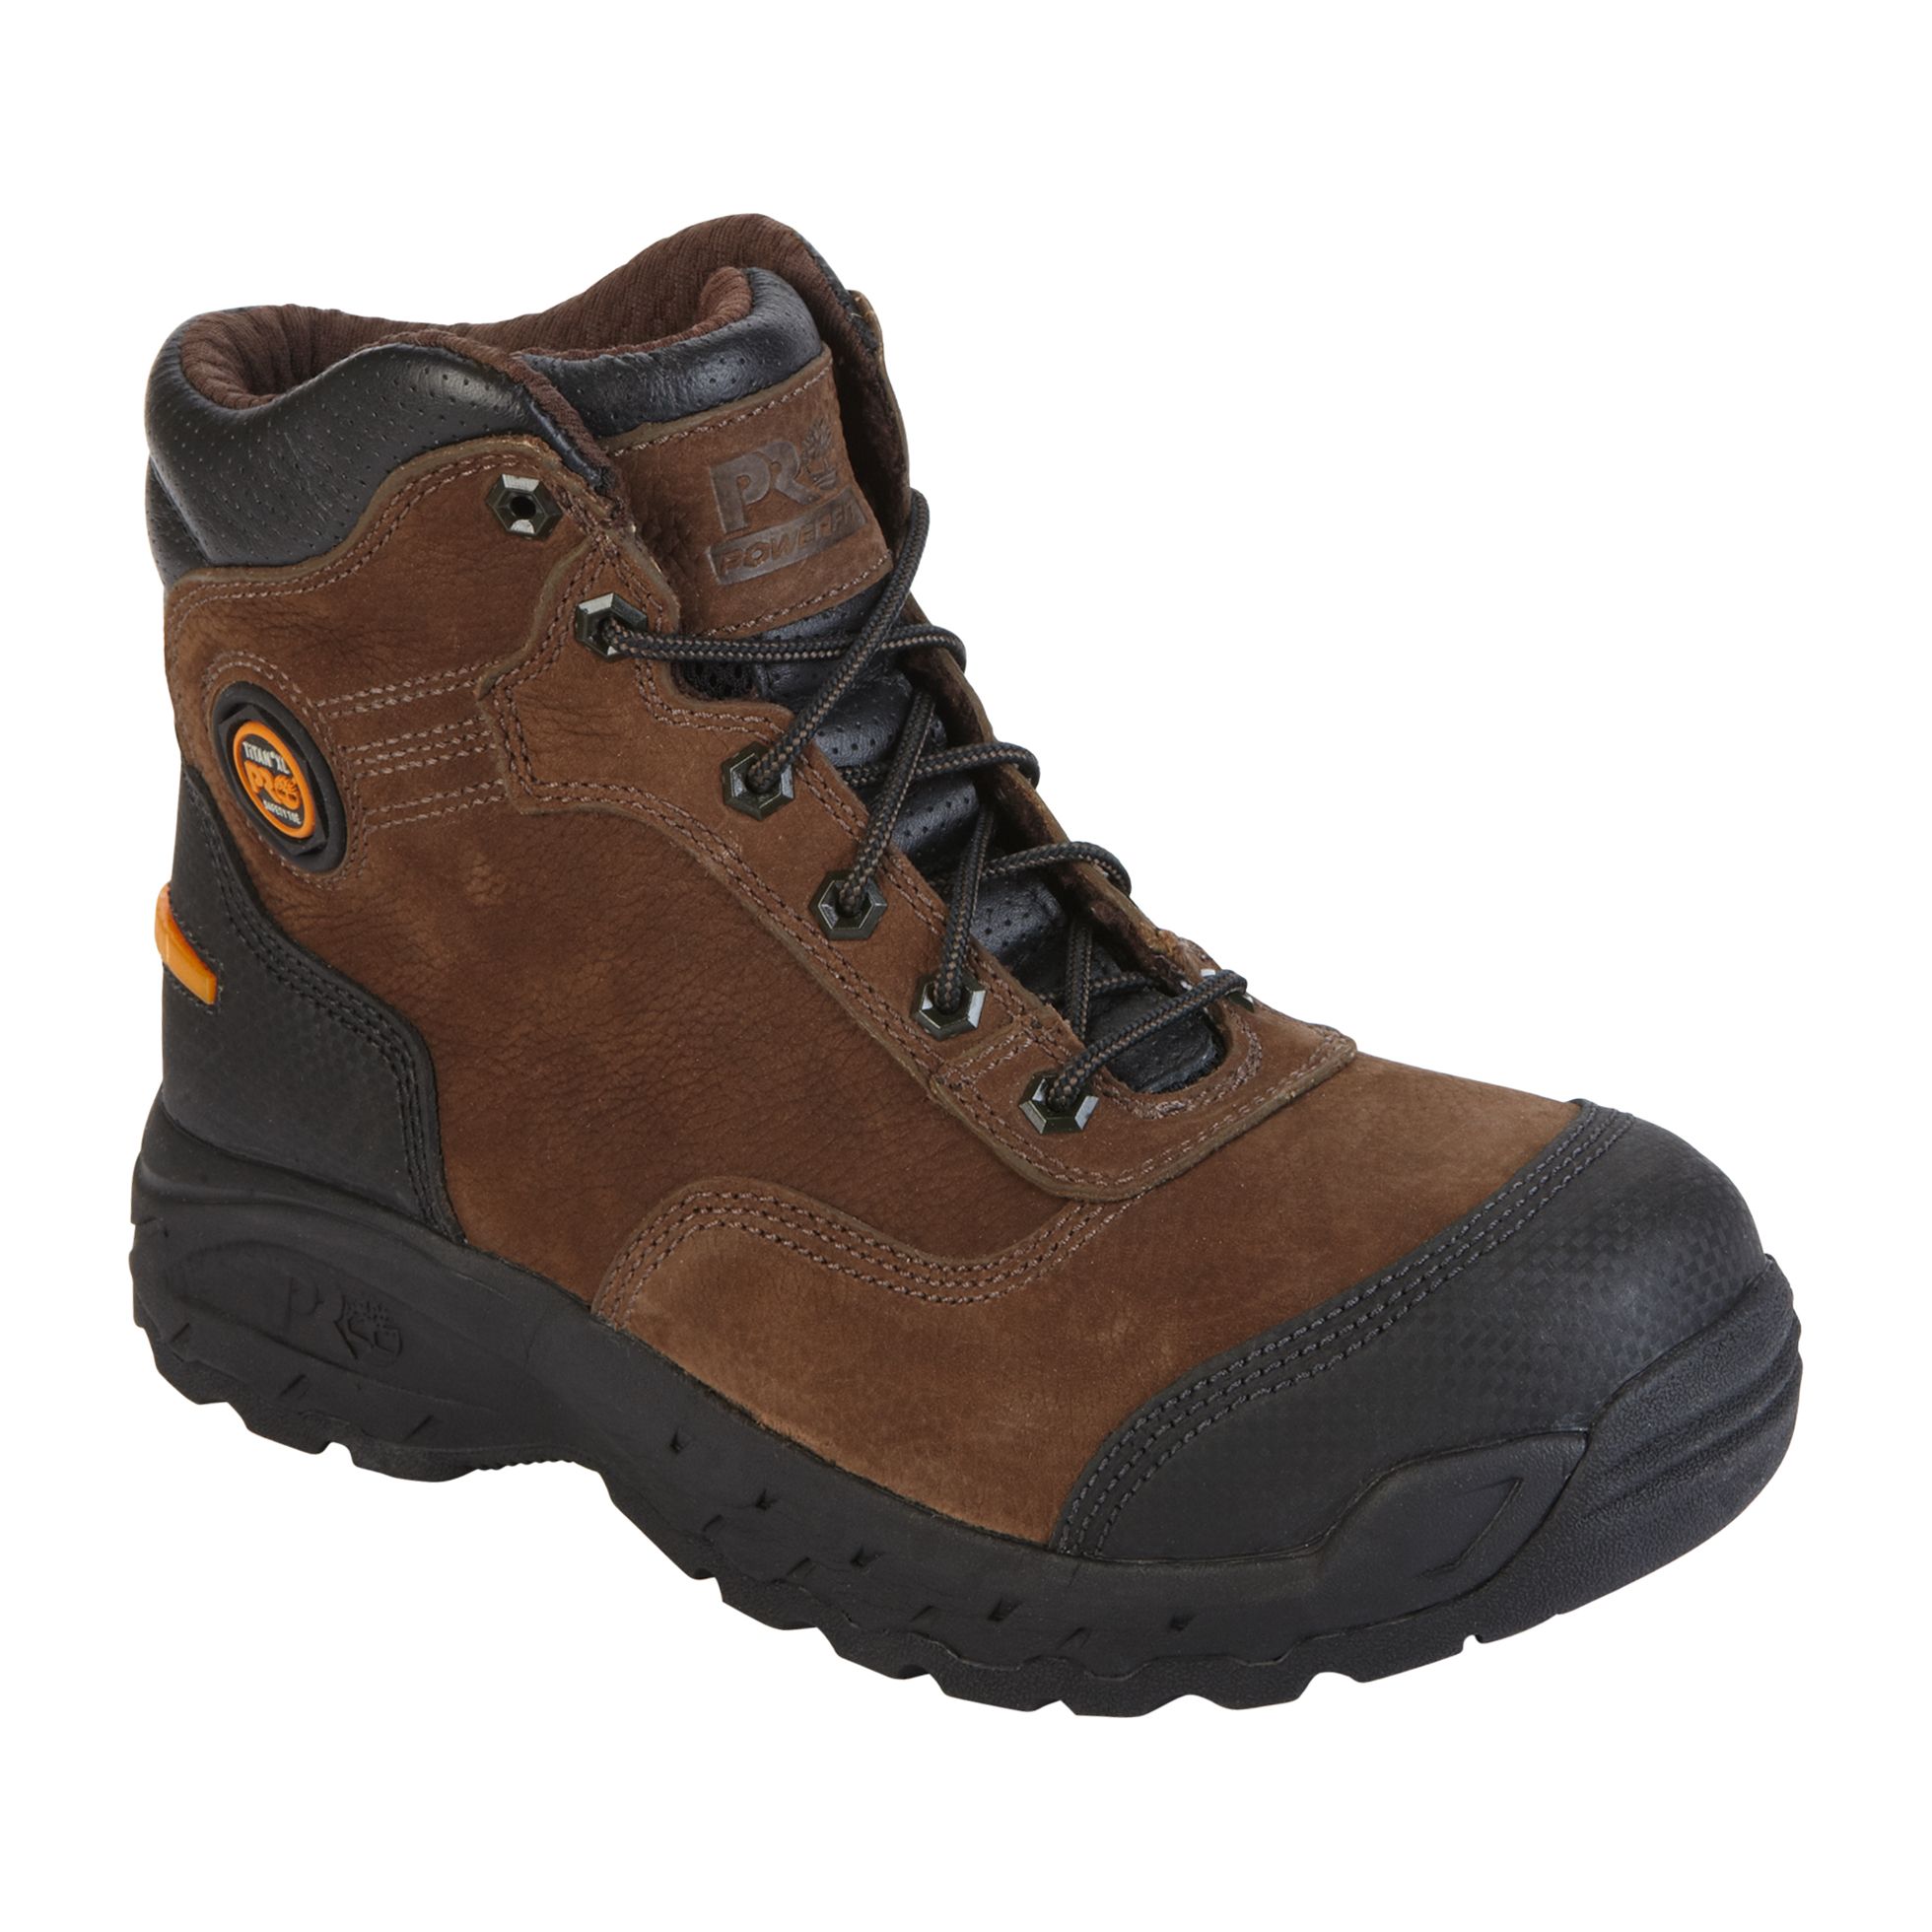 Timberland Endurance 6 in Titan XL Safety Toe - Men's - Shoes - Brown